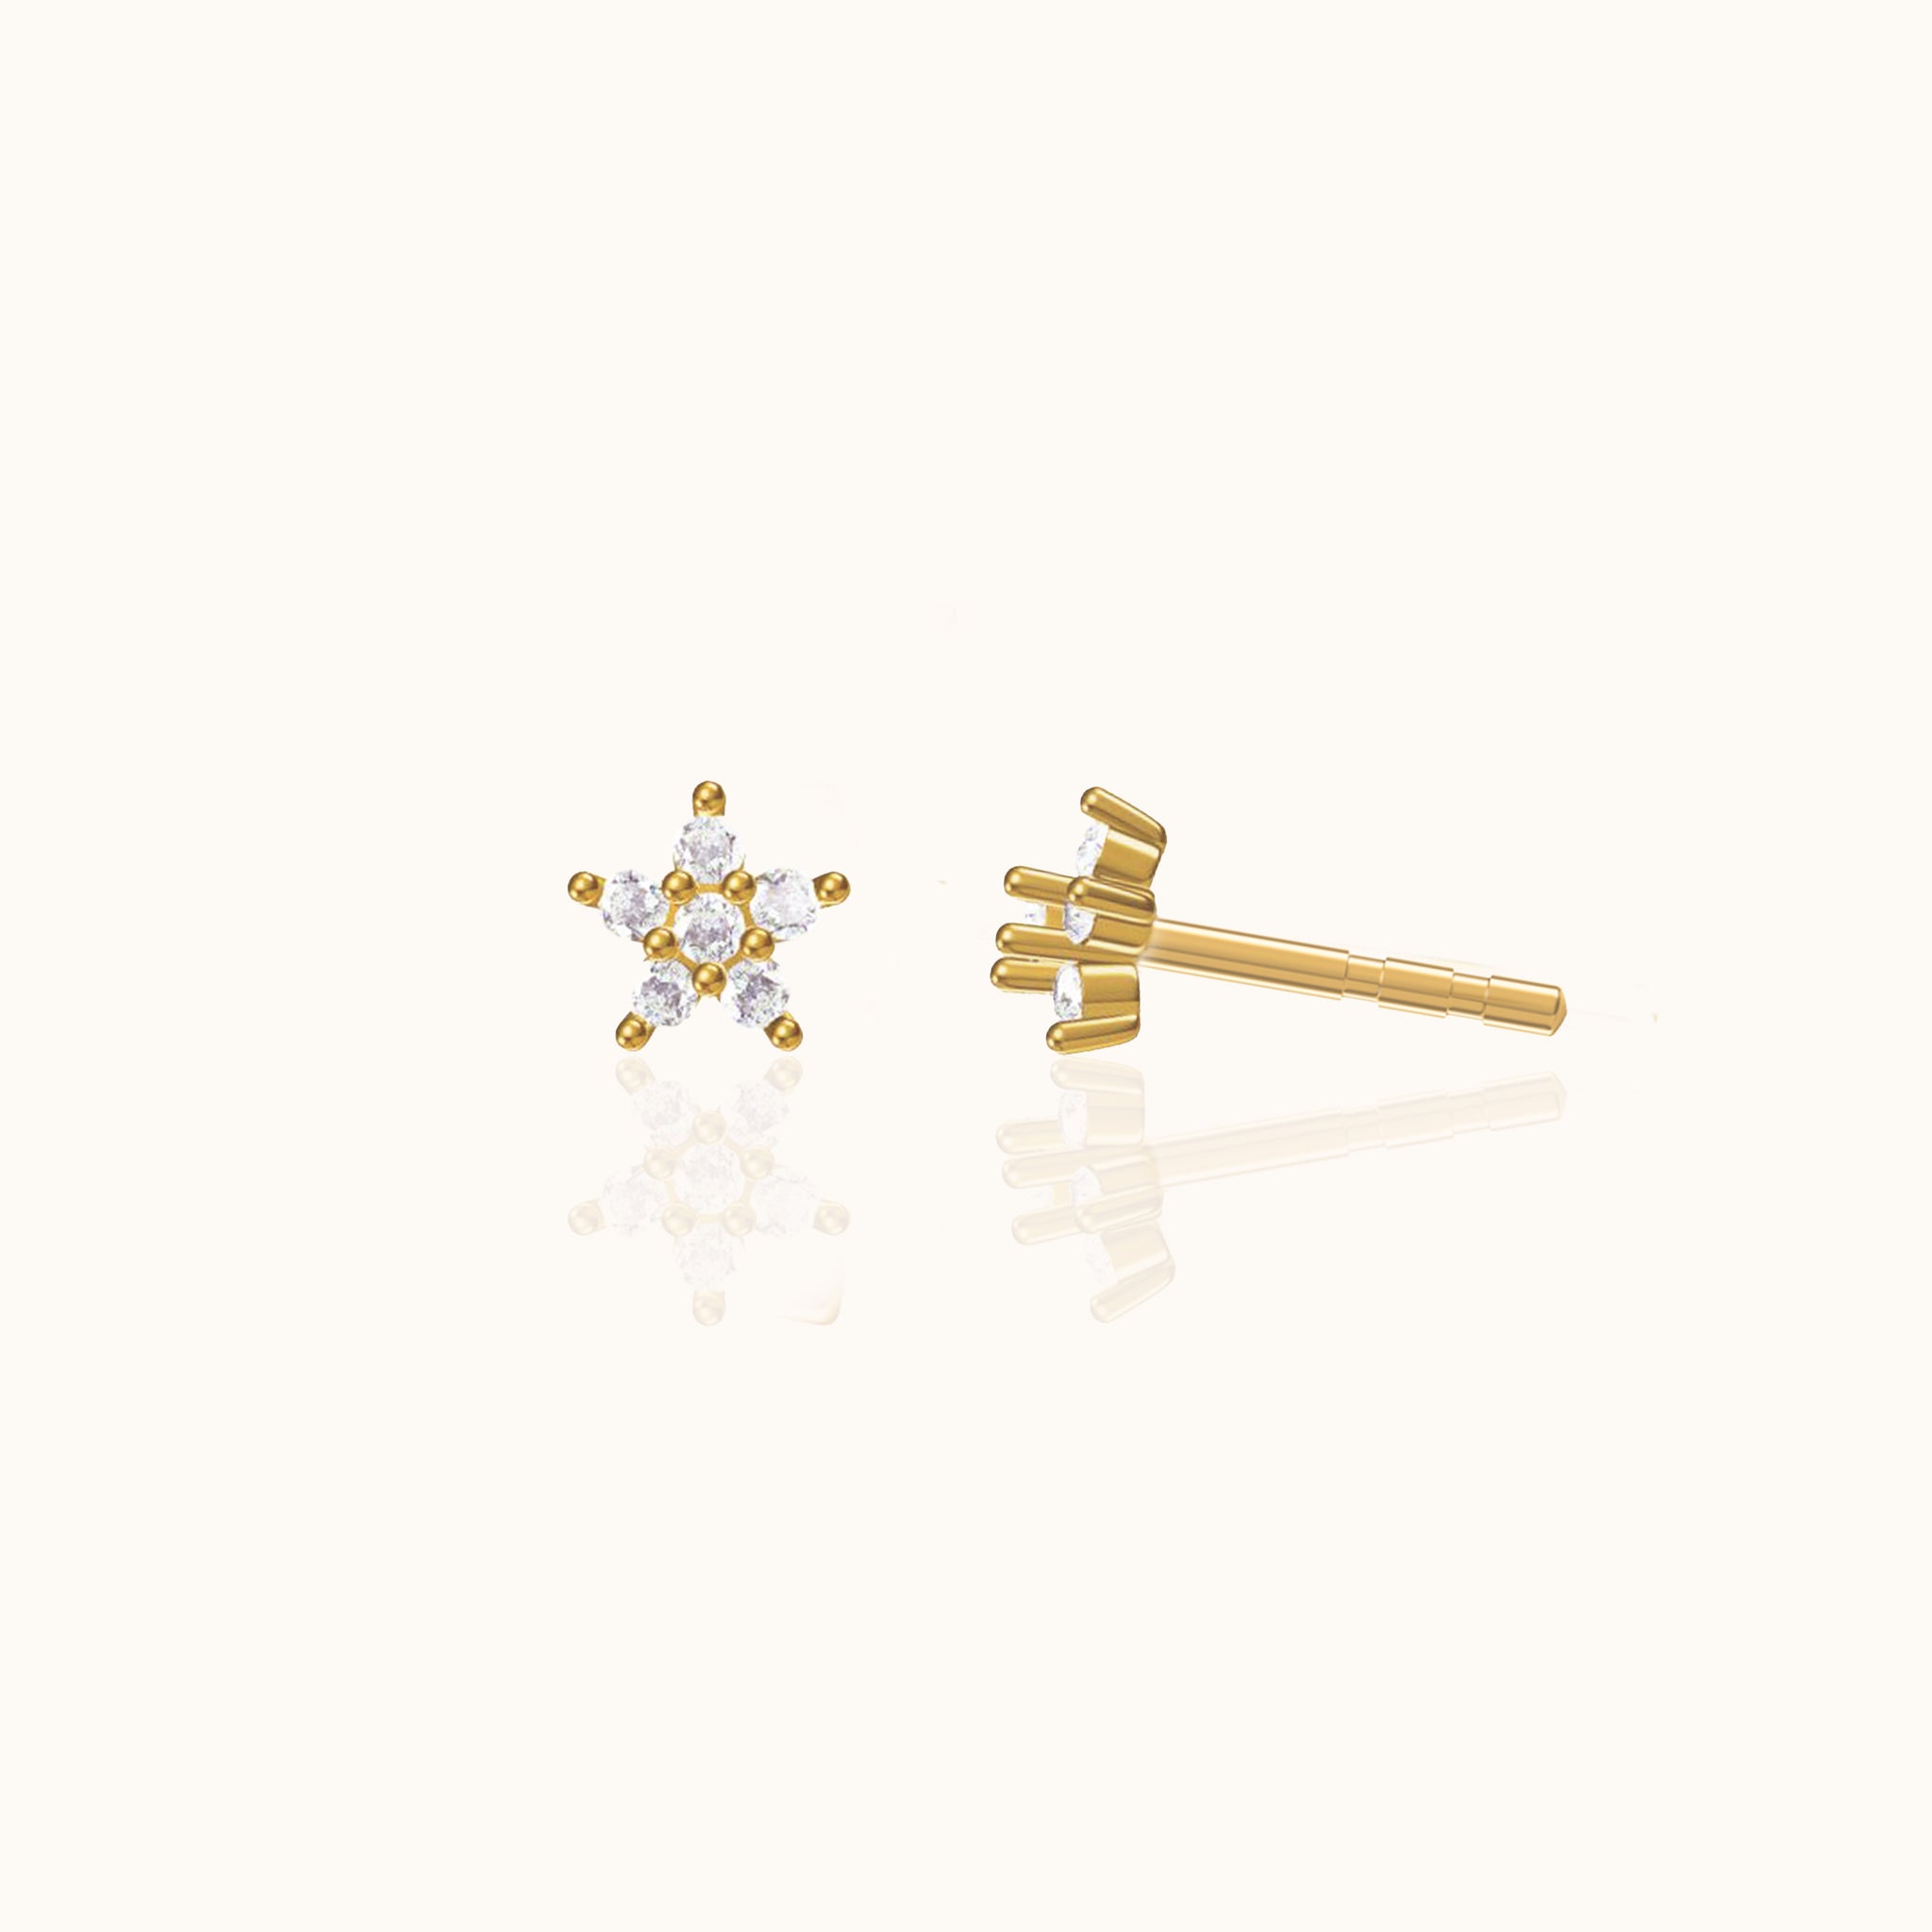 CZ Cherry Blossom Studs Gold Tiny Floral Petite Flower Petal Star Earrings by Doviana